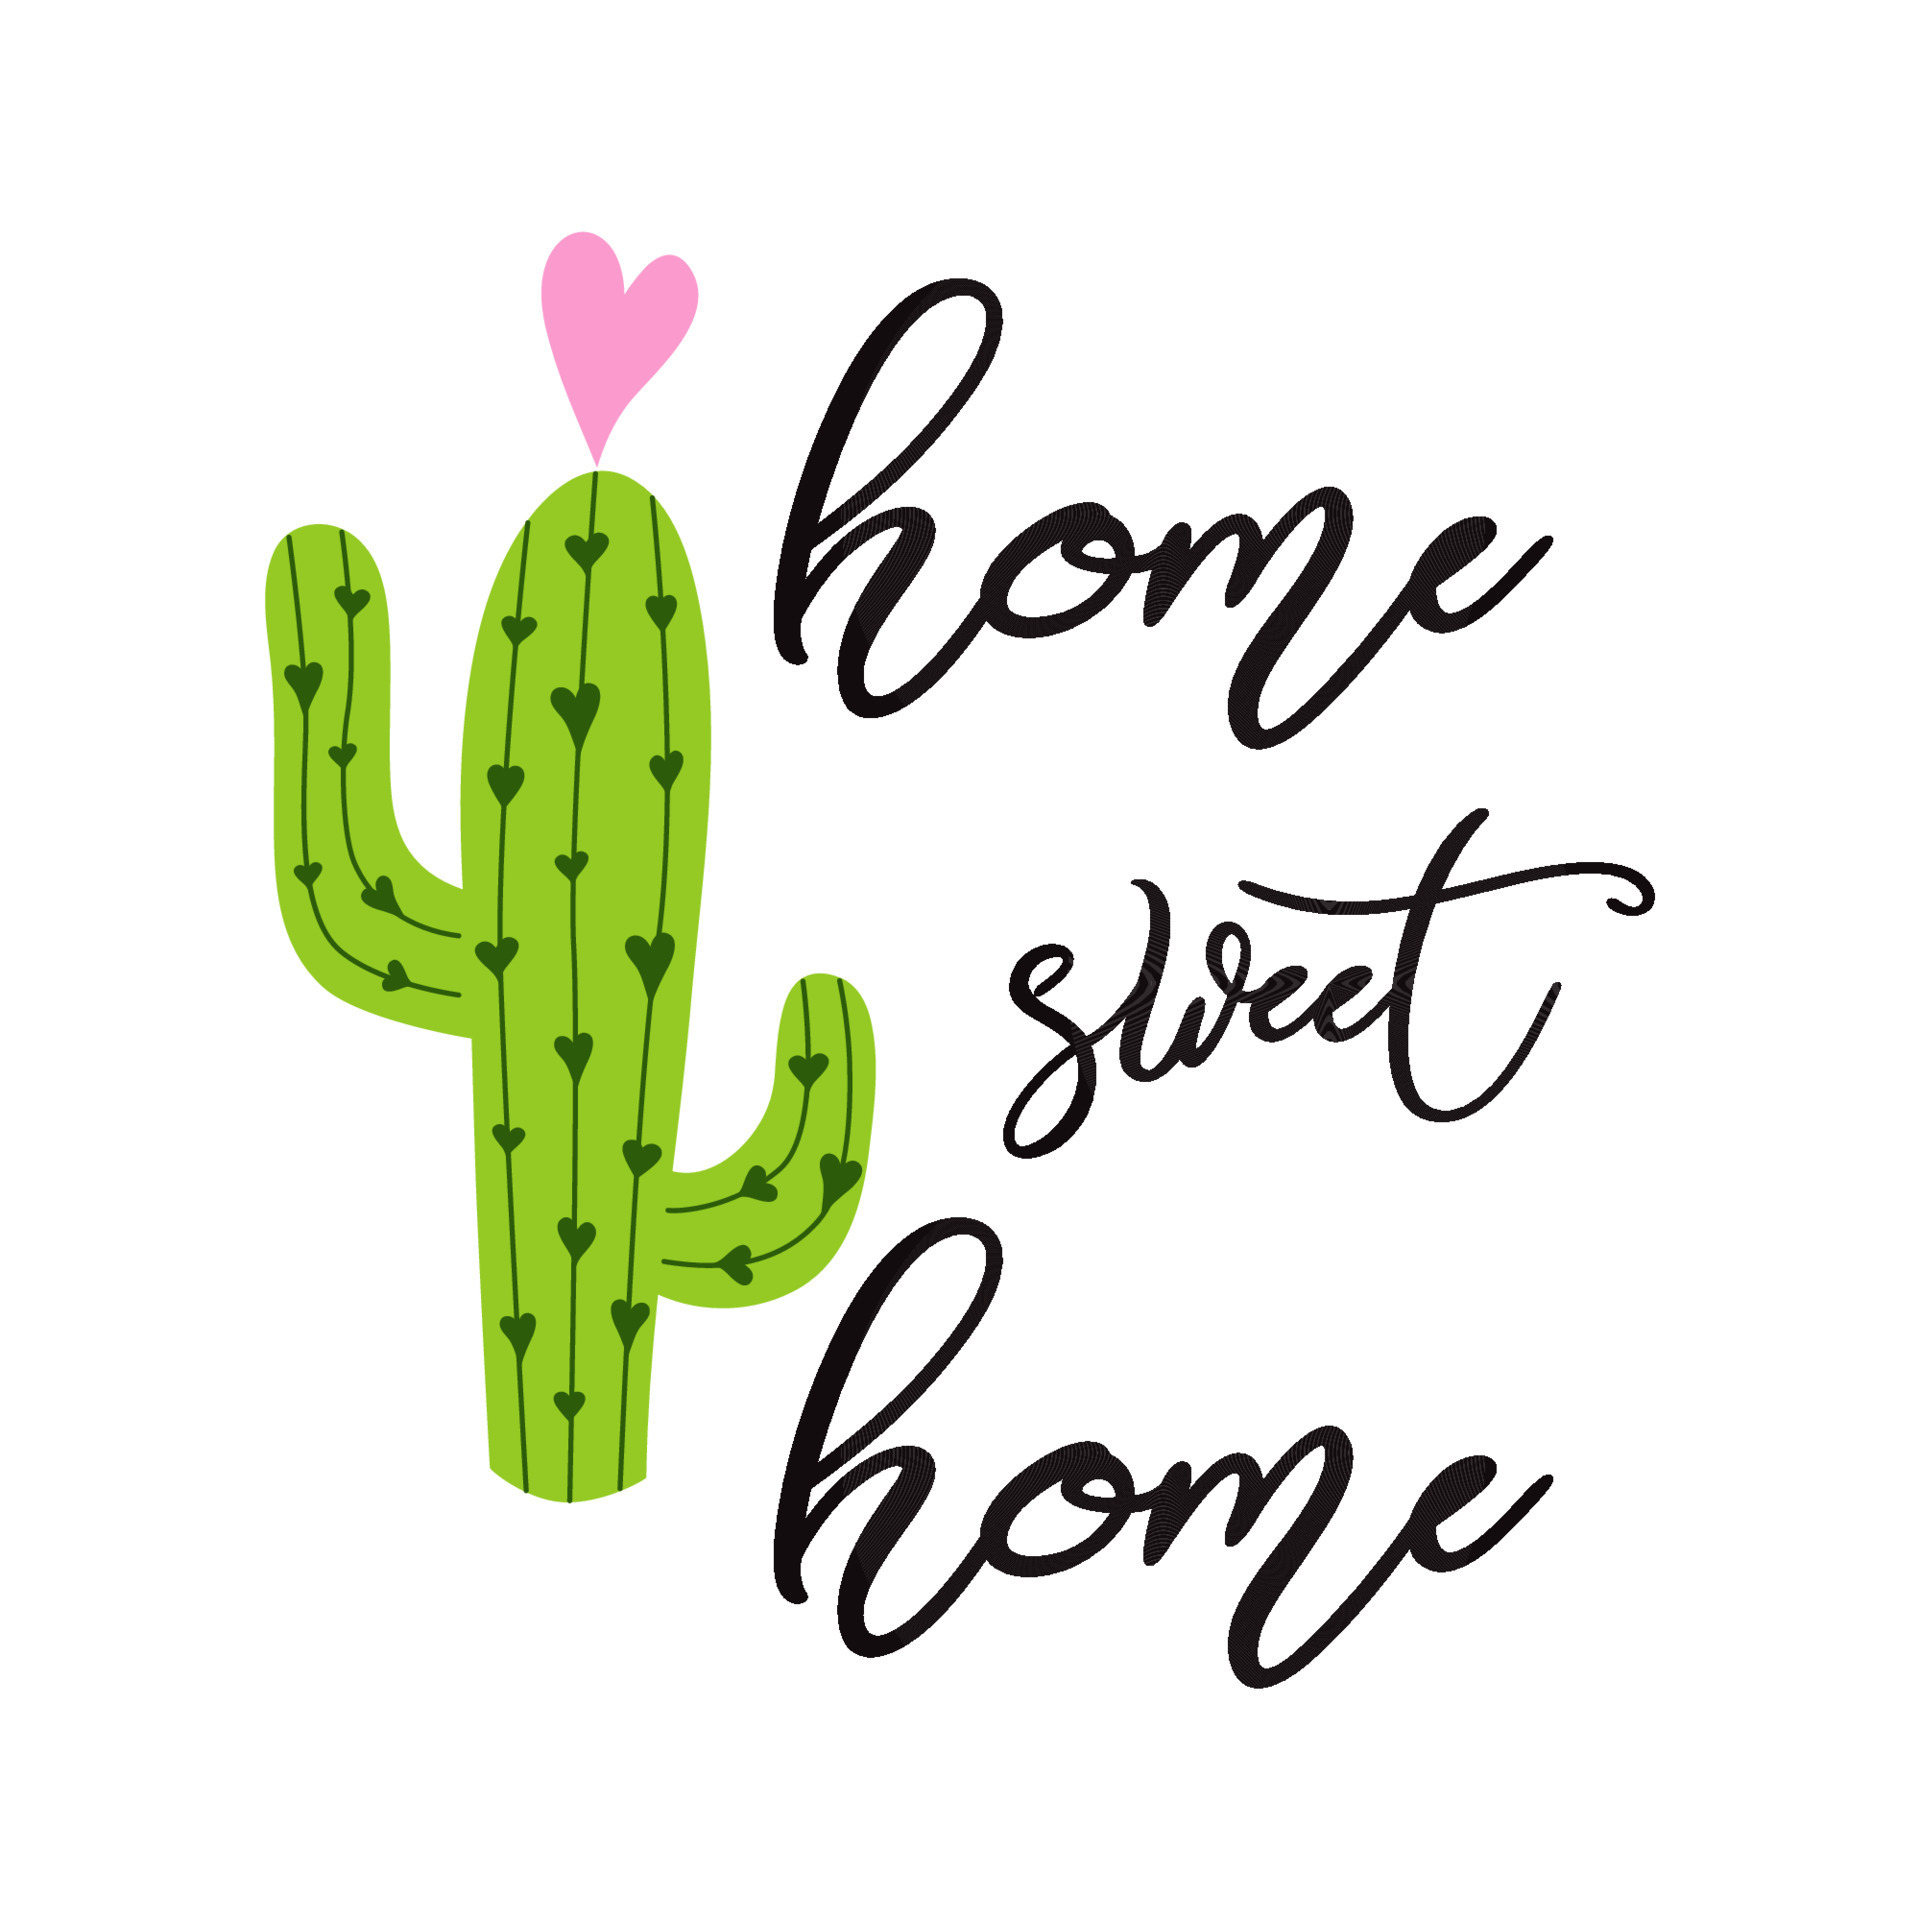 https://static.vecteezy.com/system/resources/previews/024/151/583/original/home-sweet-hom-banner-prickly-cactus-with-heart-and-inspirational-quote-on-white-background-cute-hand-drawn-greeting-cards-poster-logo-sign-print-label-symbol-illustration-home-decor-vector.jpg